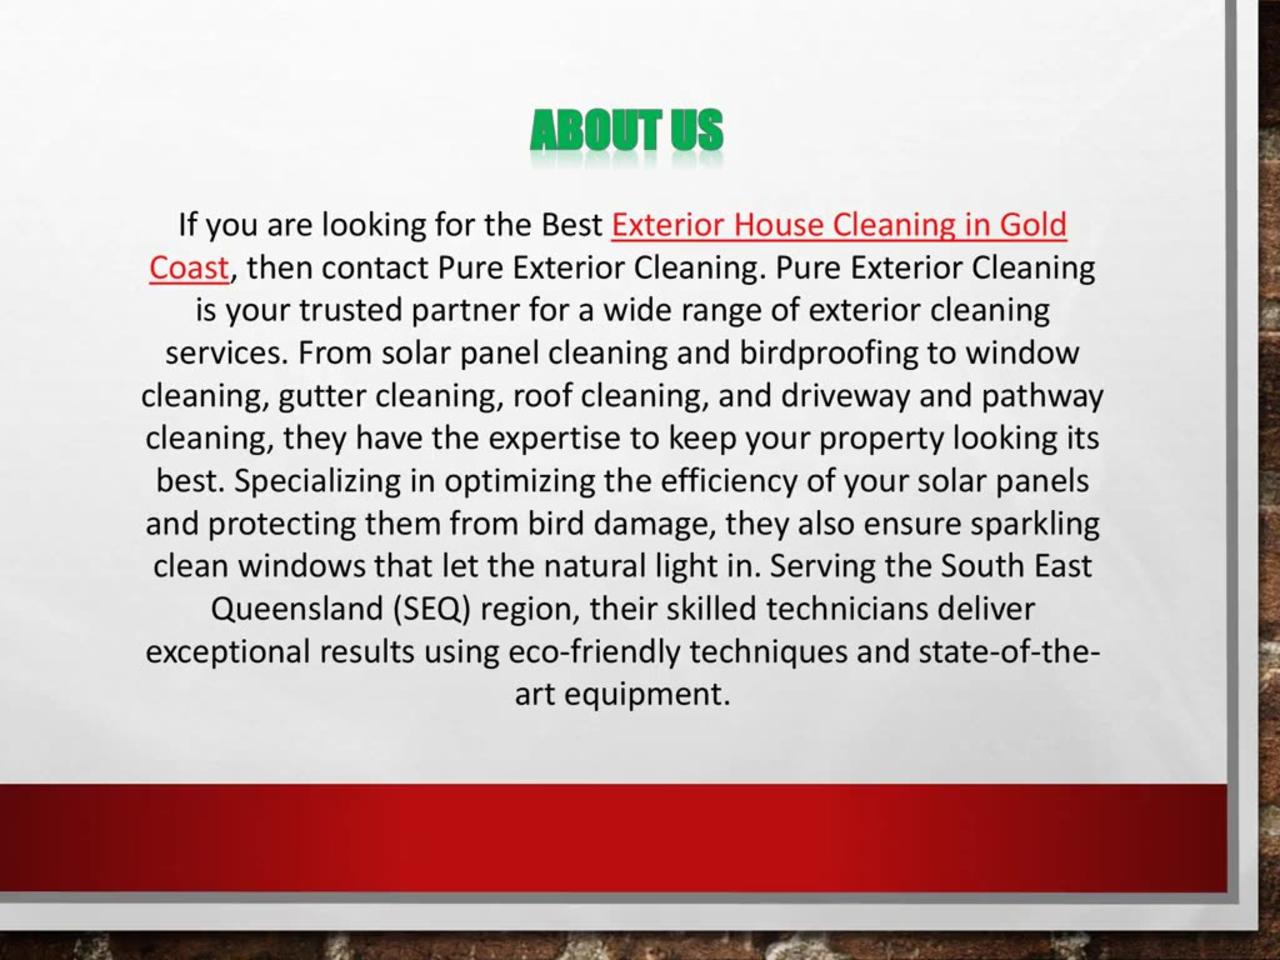 Exterior House Cleaning in Gold Coast